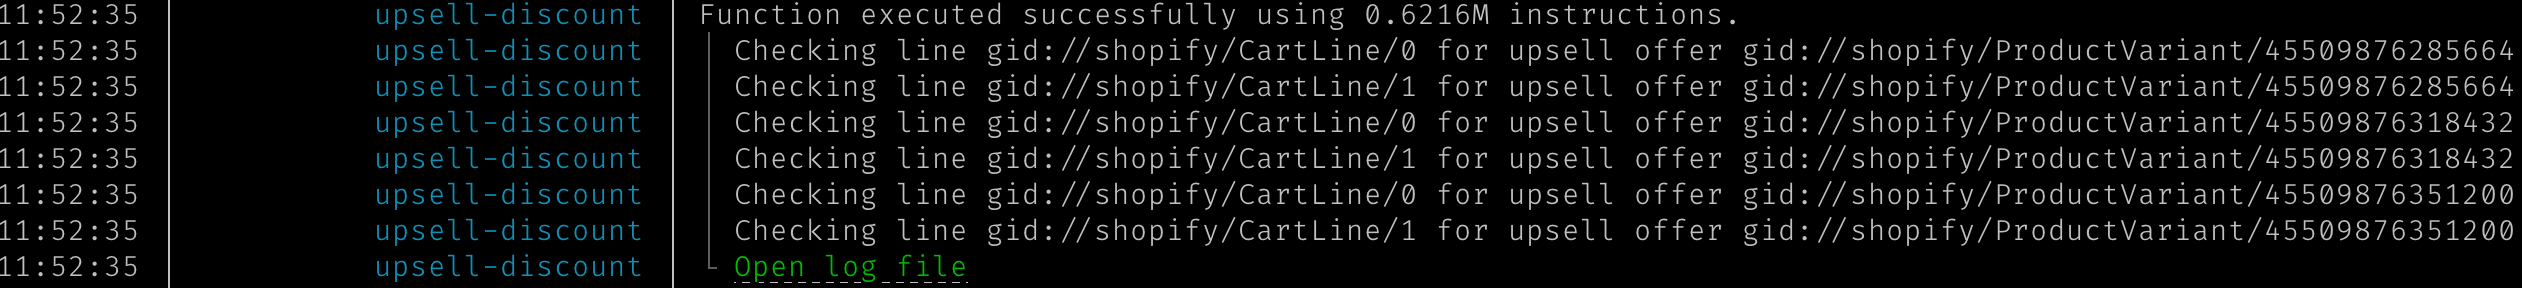 An example of Shopify Function output in Shopify CLI with STDERR logging